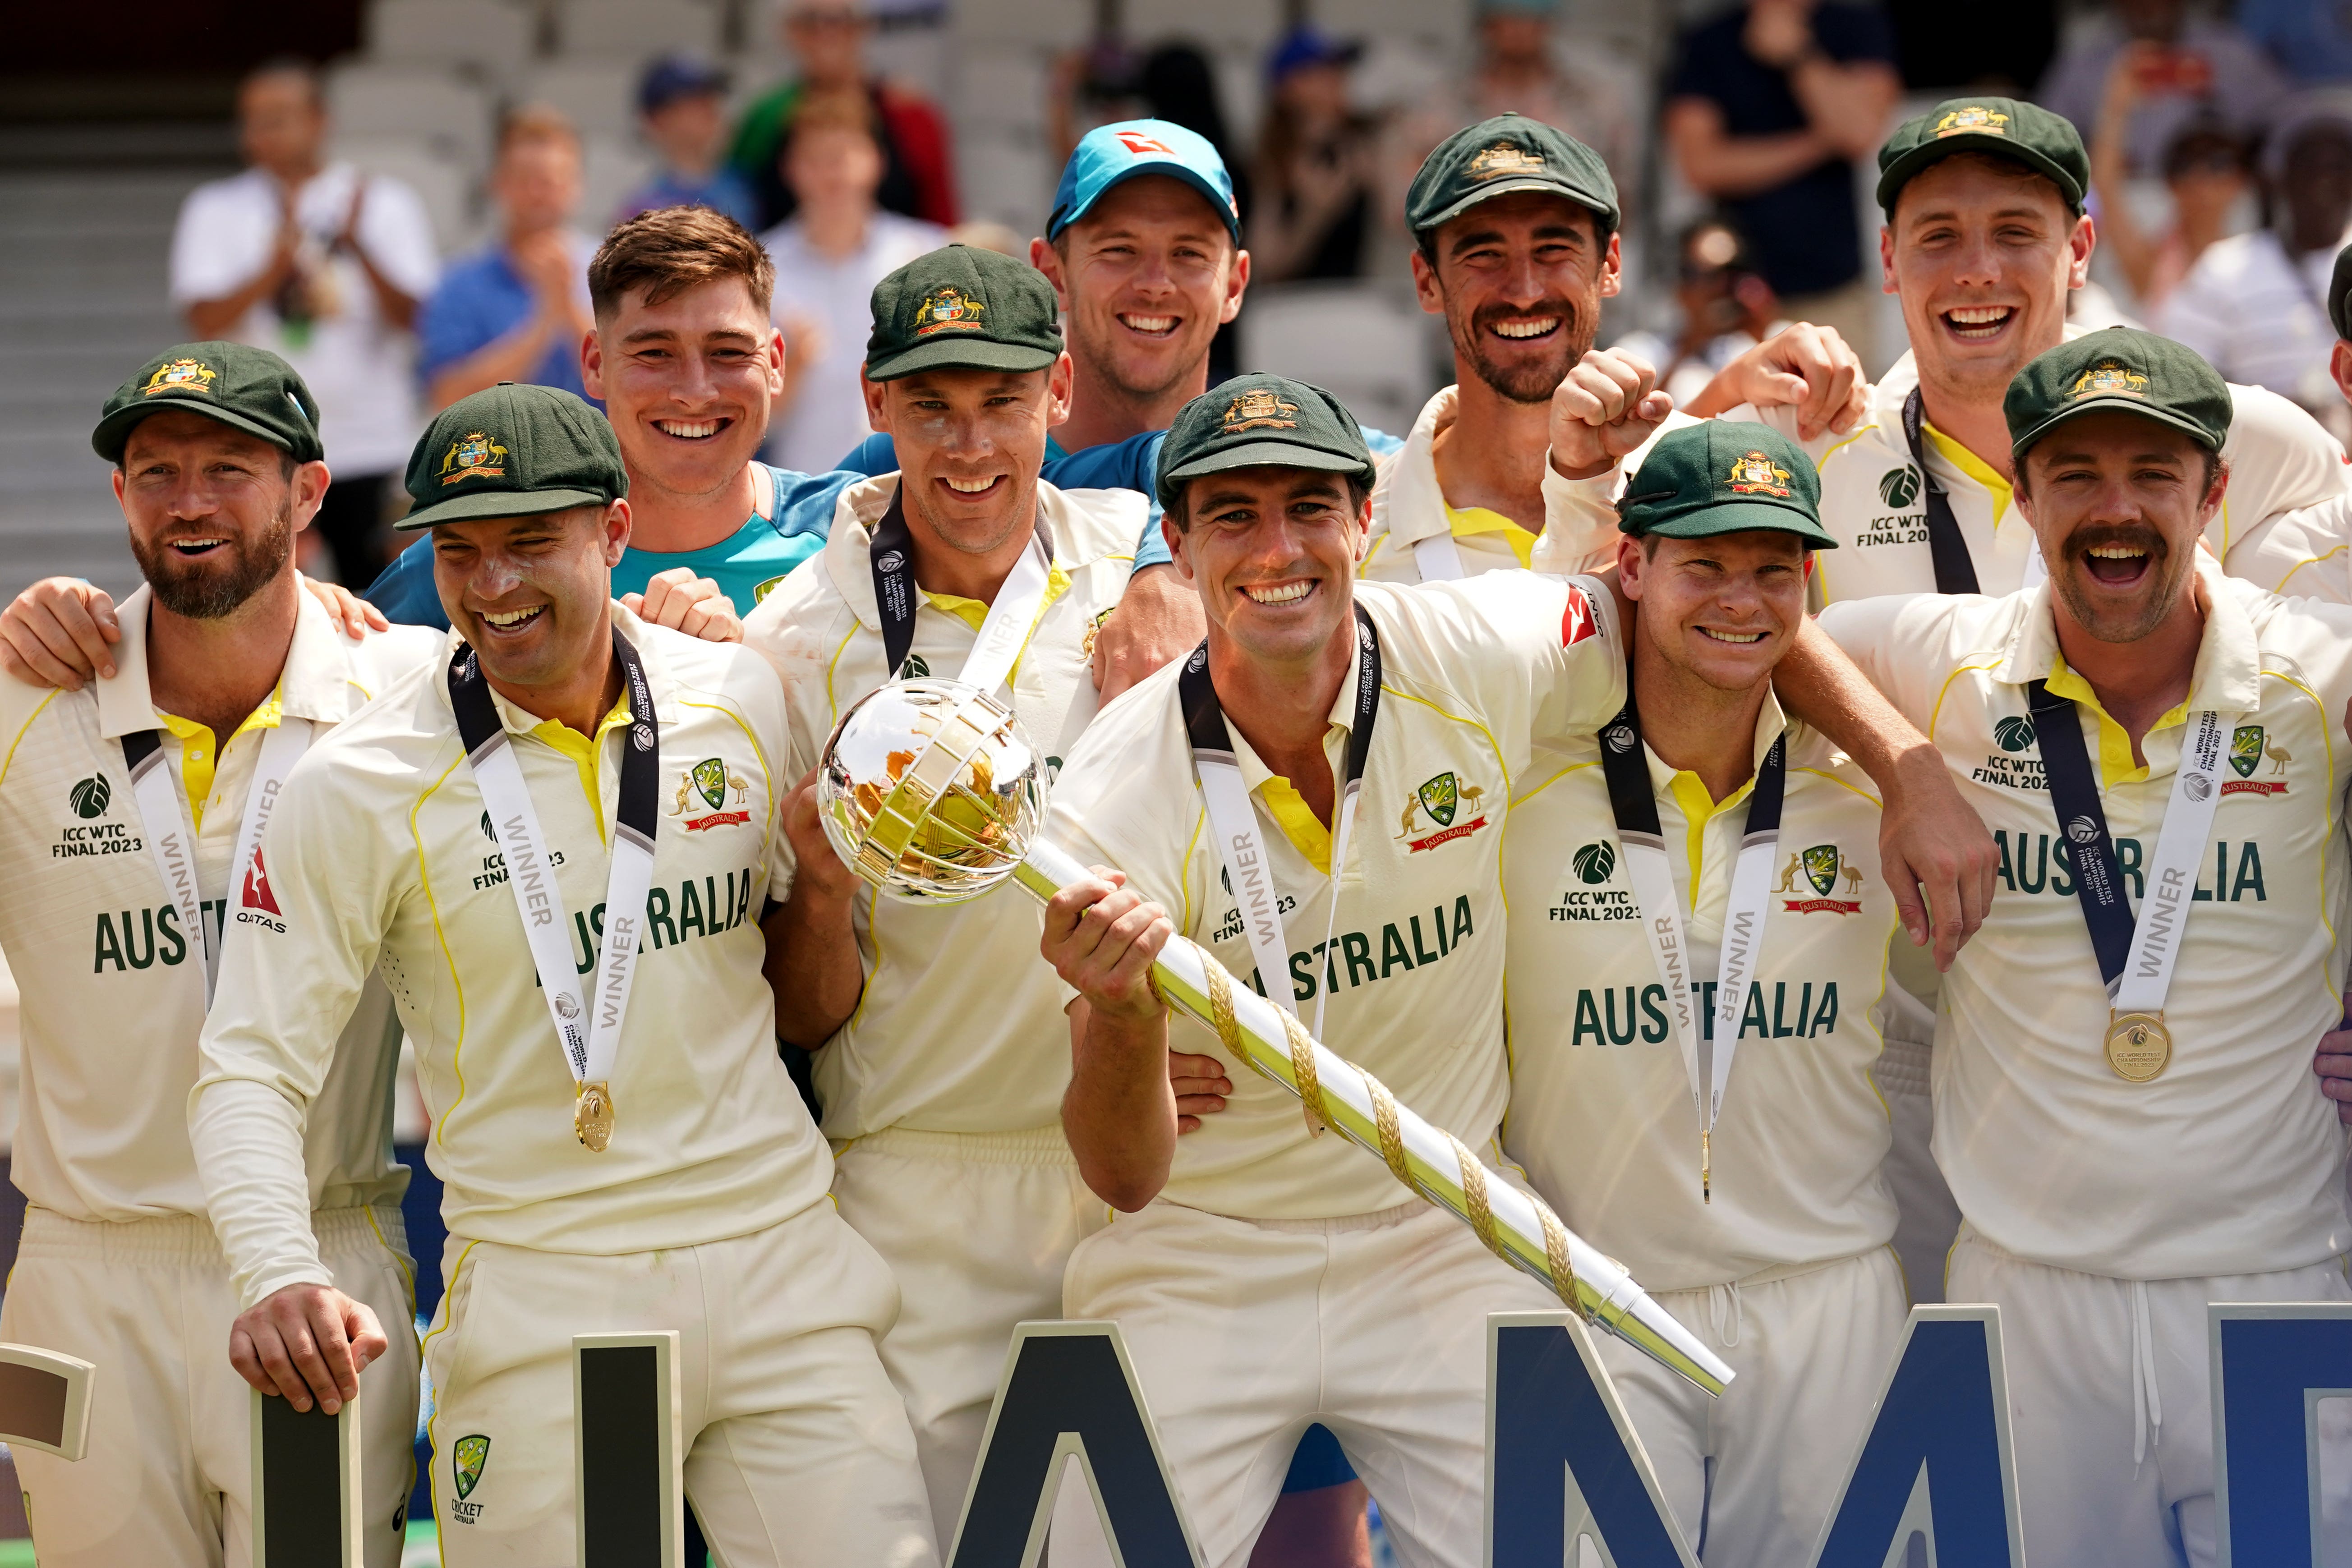 Australia beat India to claim the World Test Championship crown just days before the start of the men’s Ashes